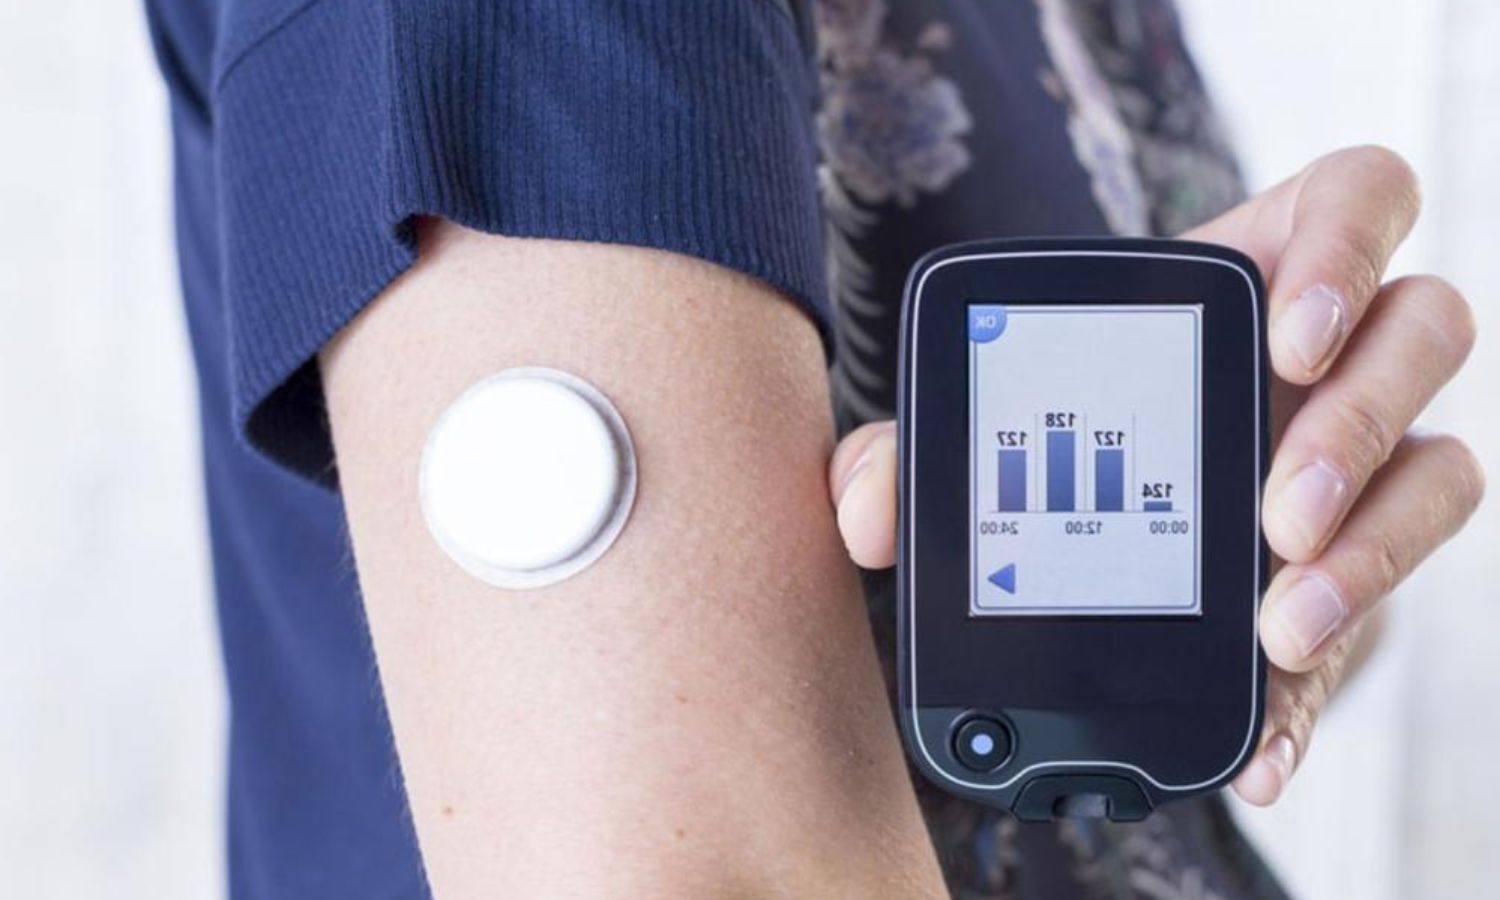 uitbreiden journalist Geef energie Flash glucose monitoring effective strategy for monitoring blood sugar in  diabetes patients, study suggests